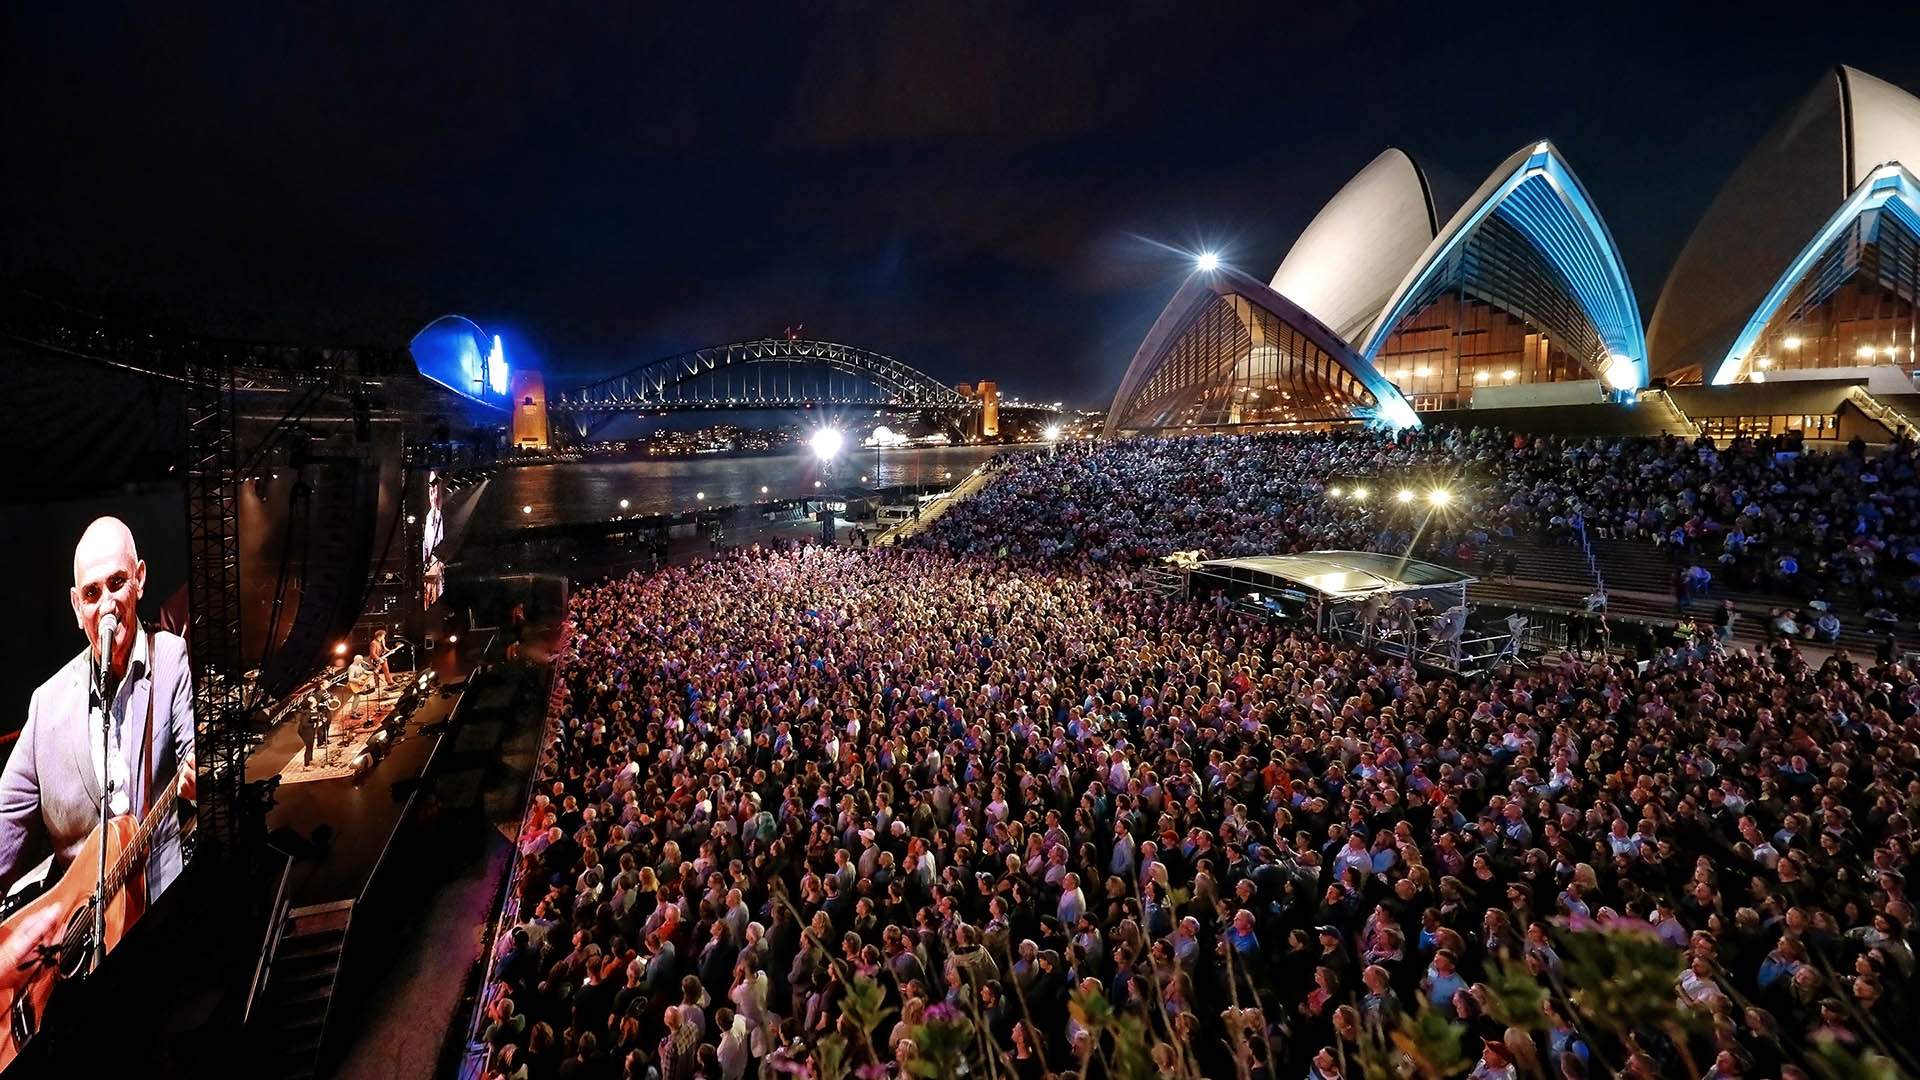 Sydney Opera House Is Marking Its 50th Anniversary with 230-Plus Performances, Events and Experiences